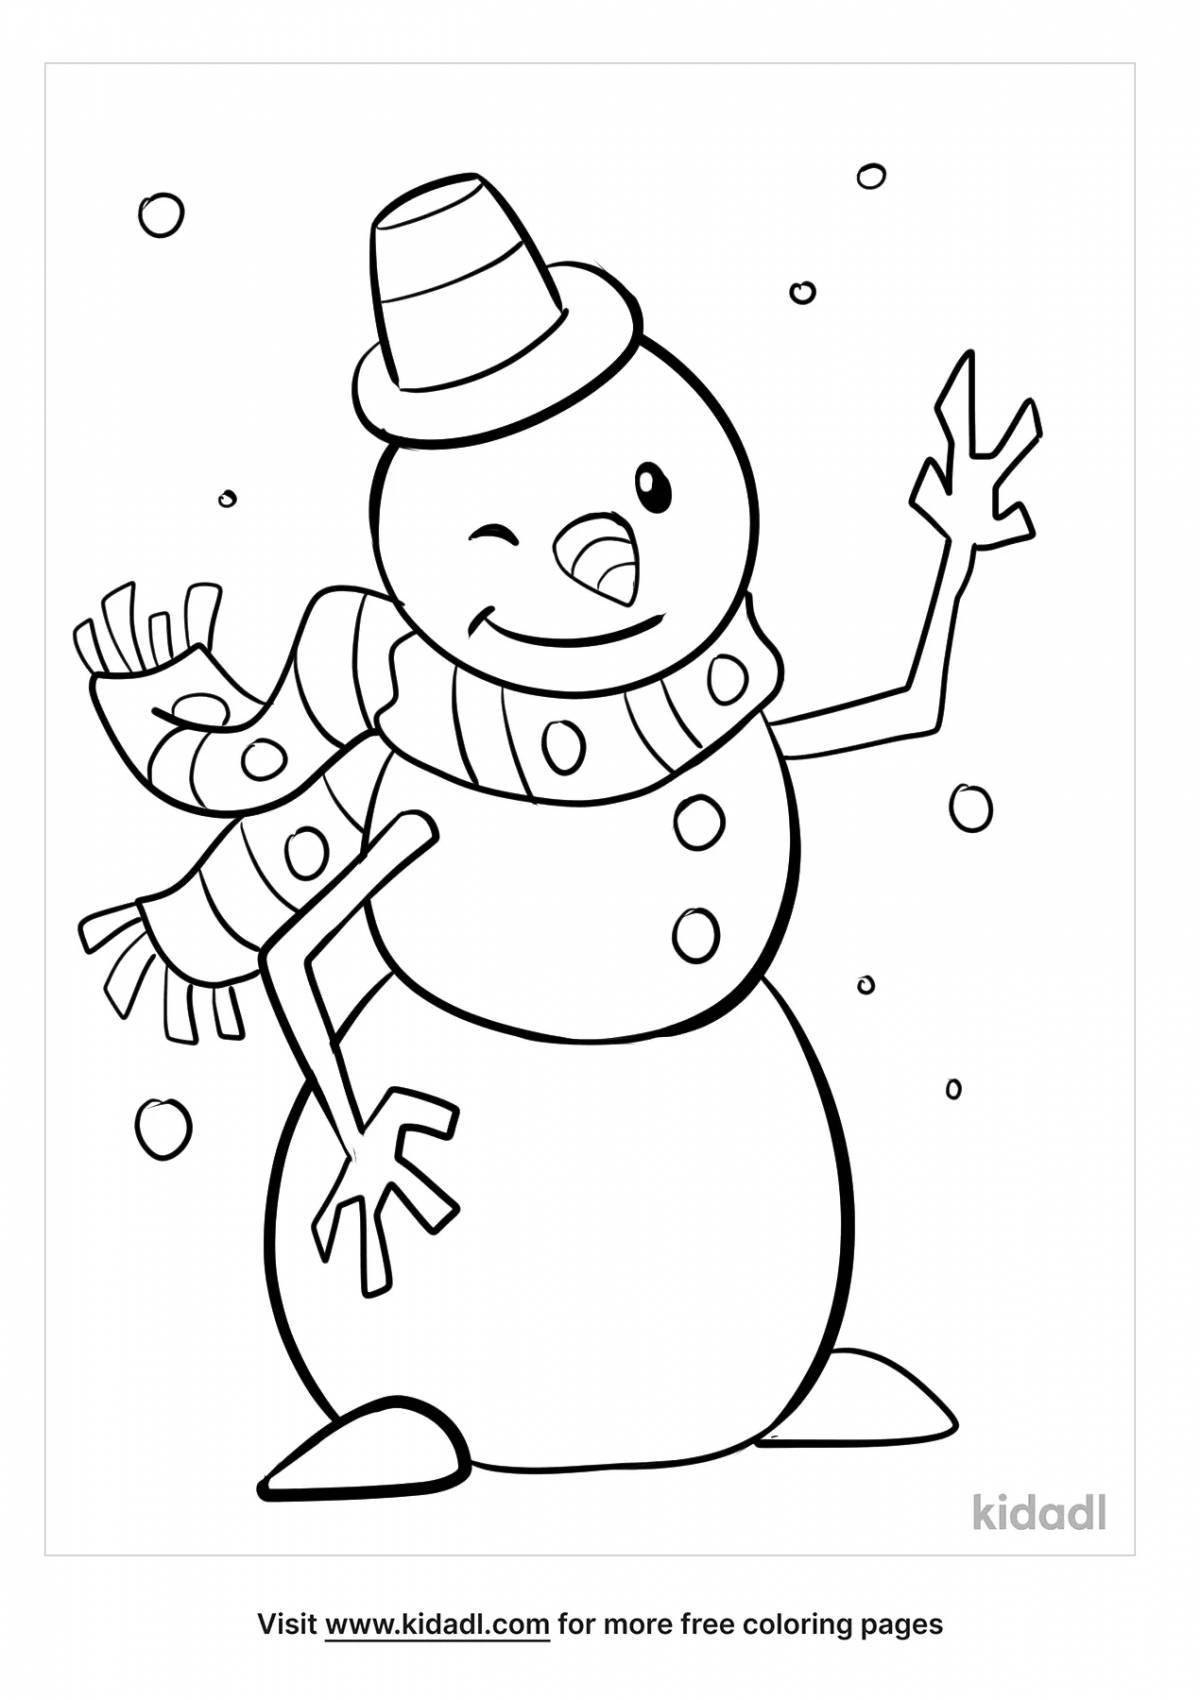 Holiday snowman coloring book for children 5 years old